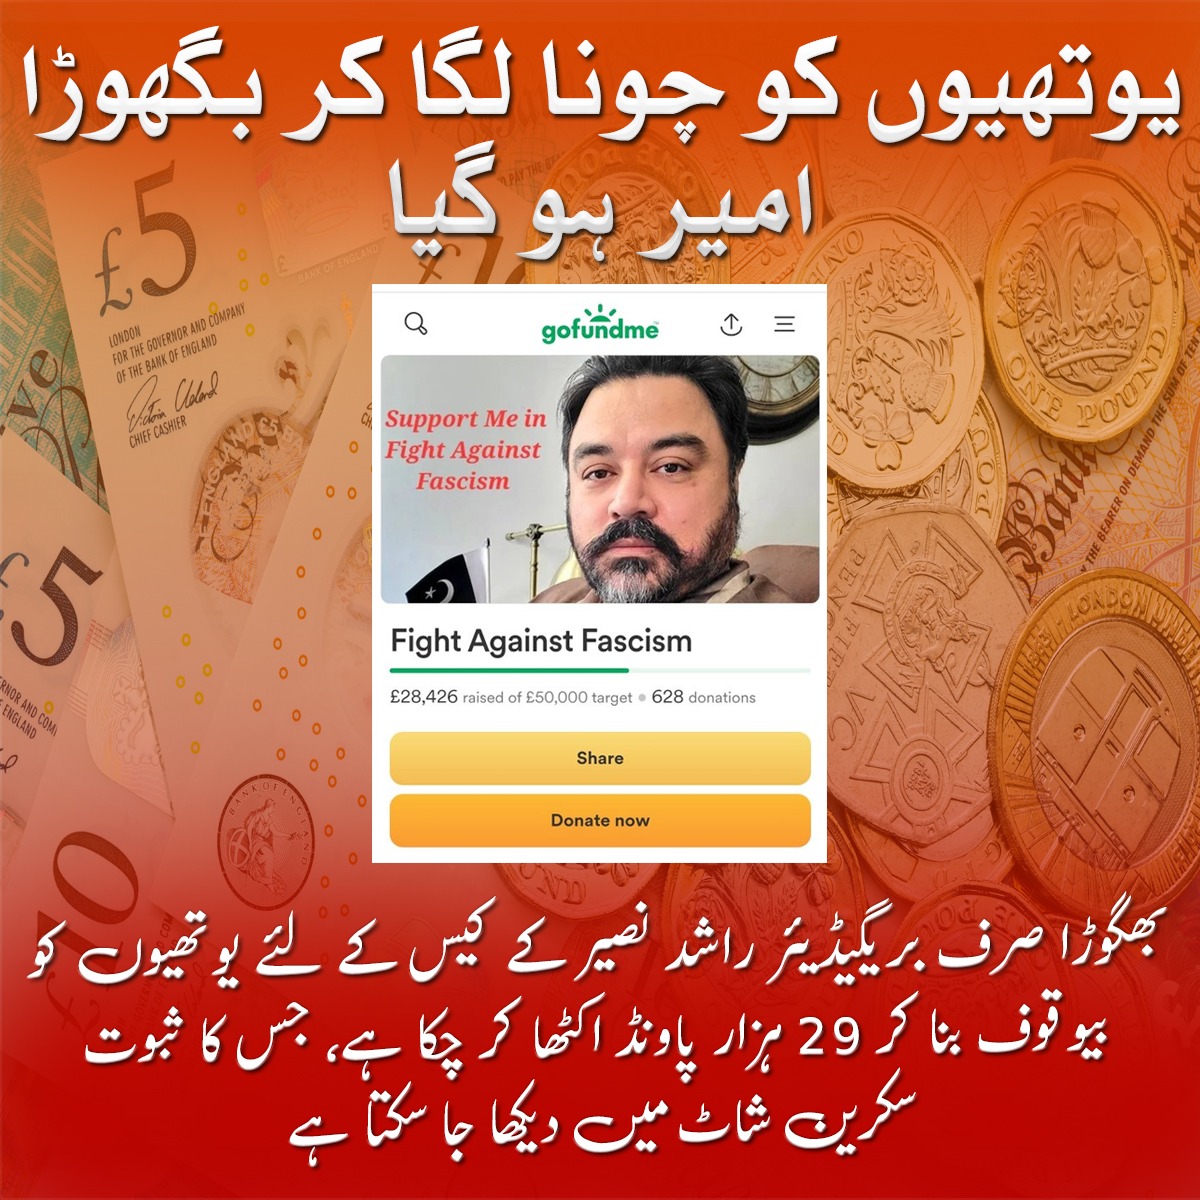 Adil Raja, lost defamation case against retired ISI Brigadier Rashid Nasir in London court. All earnings from YouTube lies to be handed over to Brigadier Nasir. Truth triumphs!
#عادل_بھگوڑا_وڑگیا